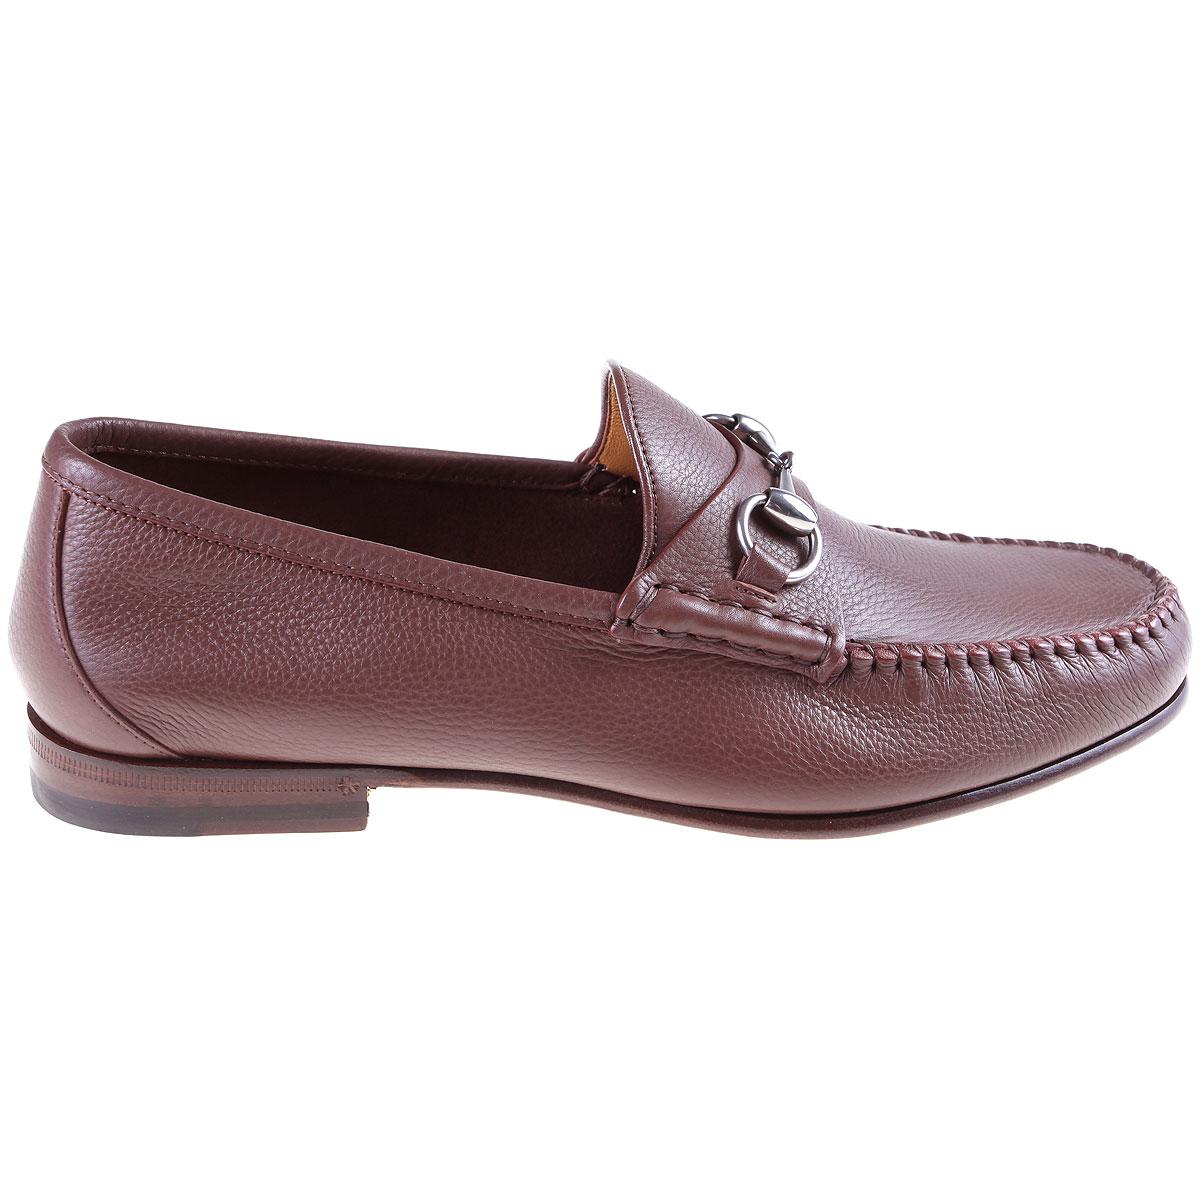 Gucci Loafers For Men On Sale In Outlet in Brown for Men - Lyst